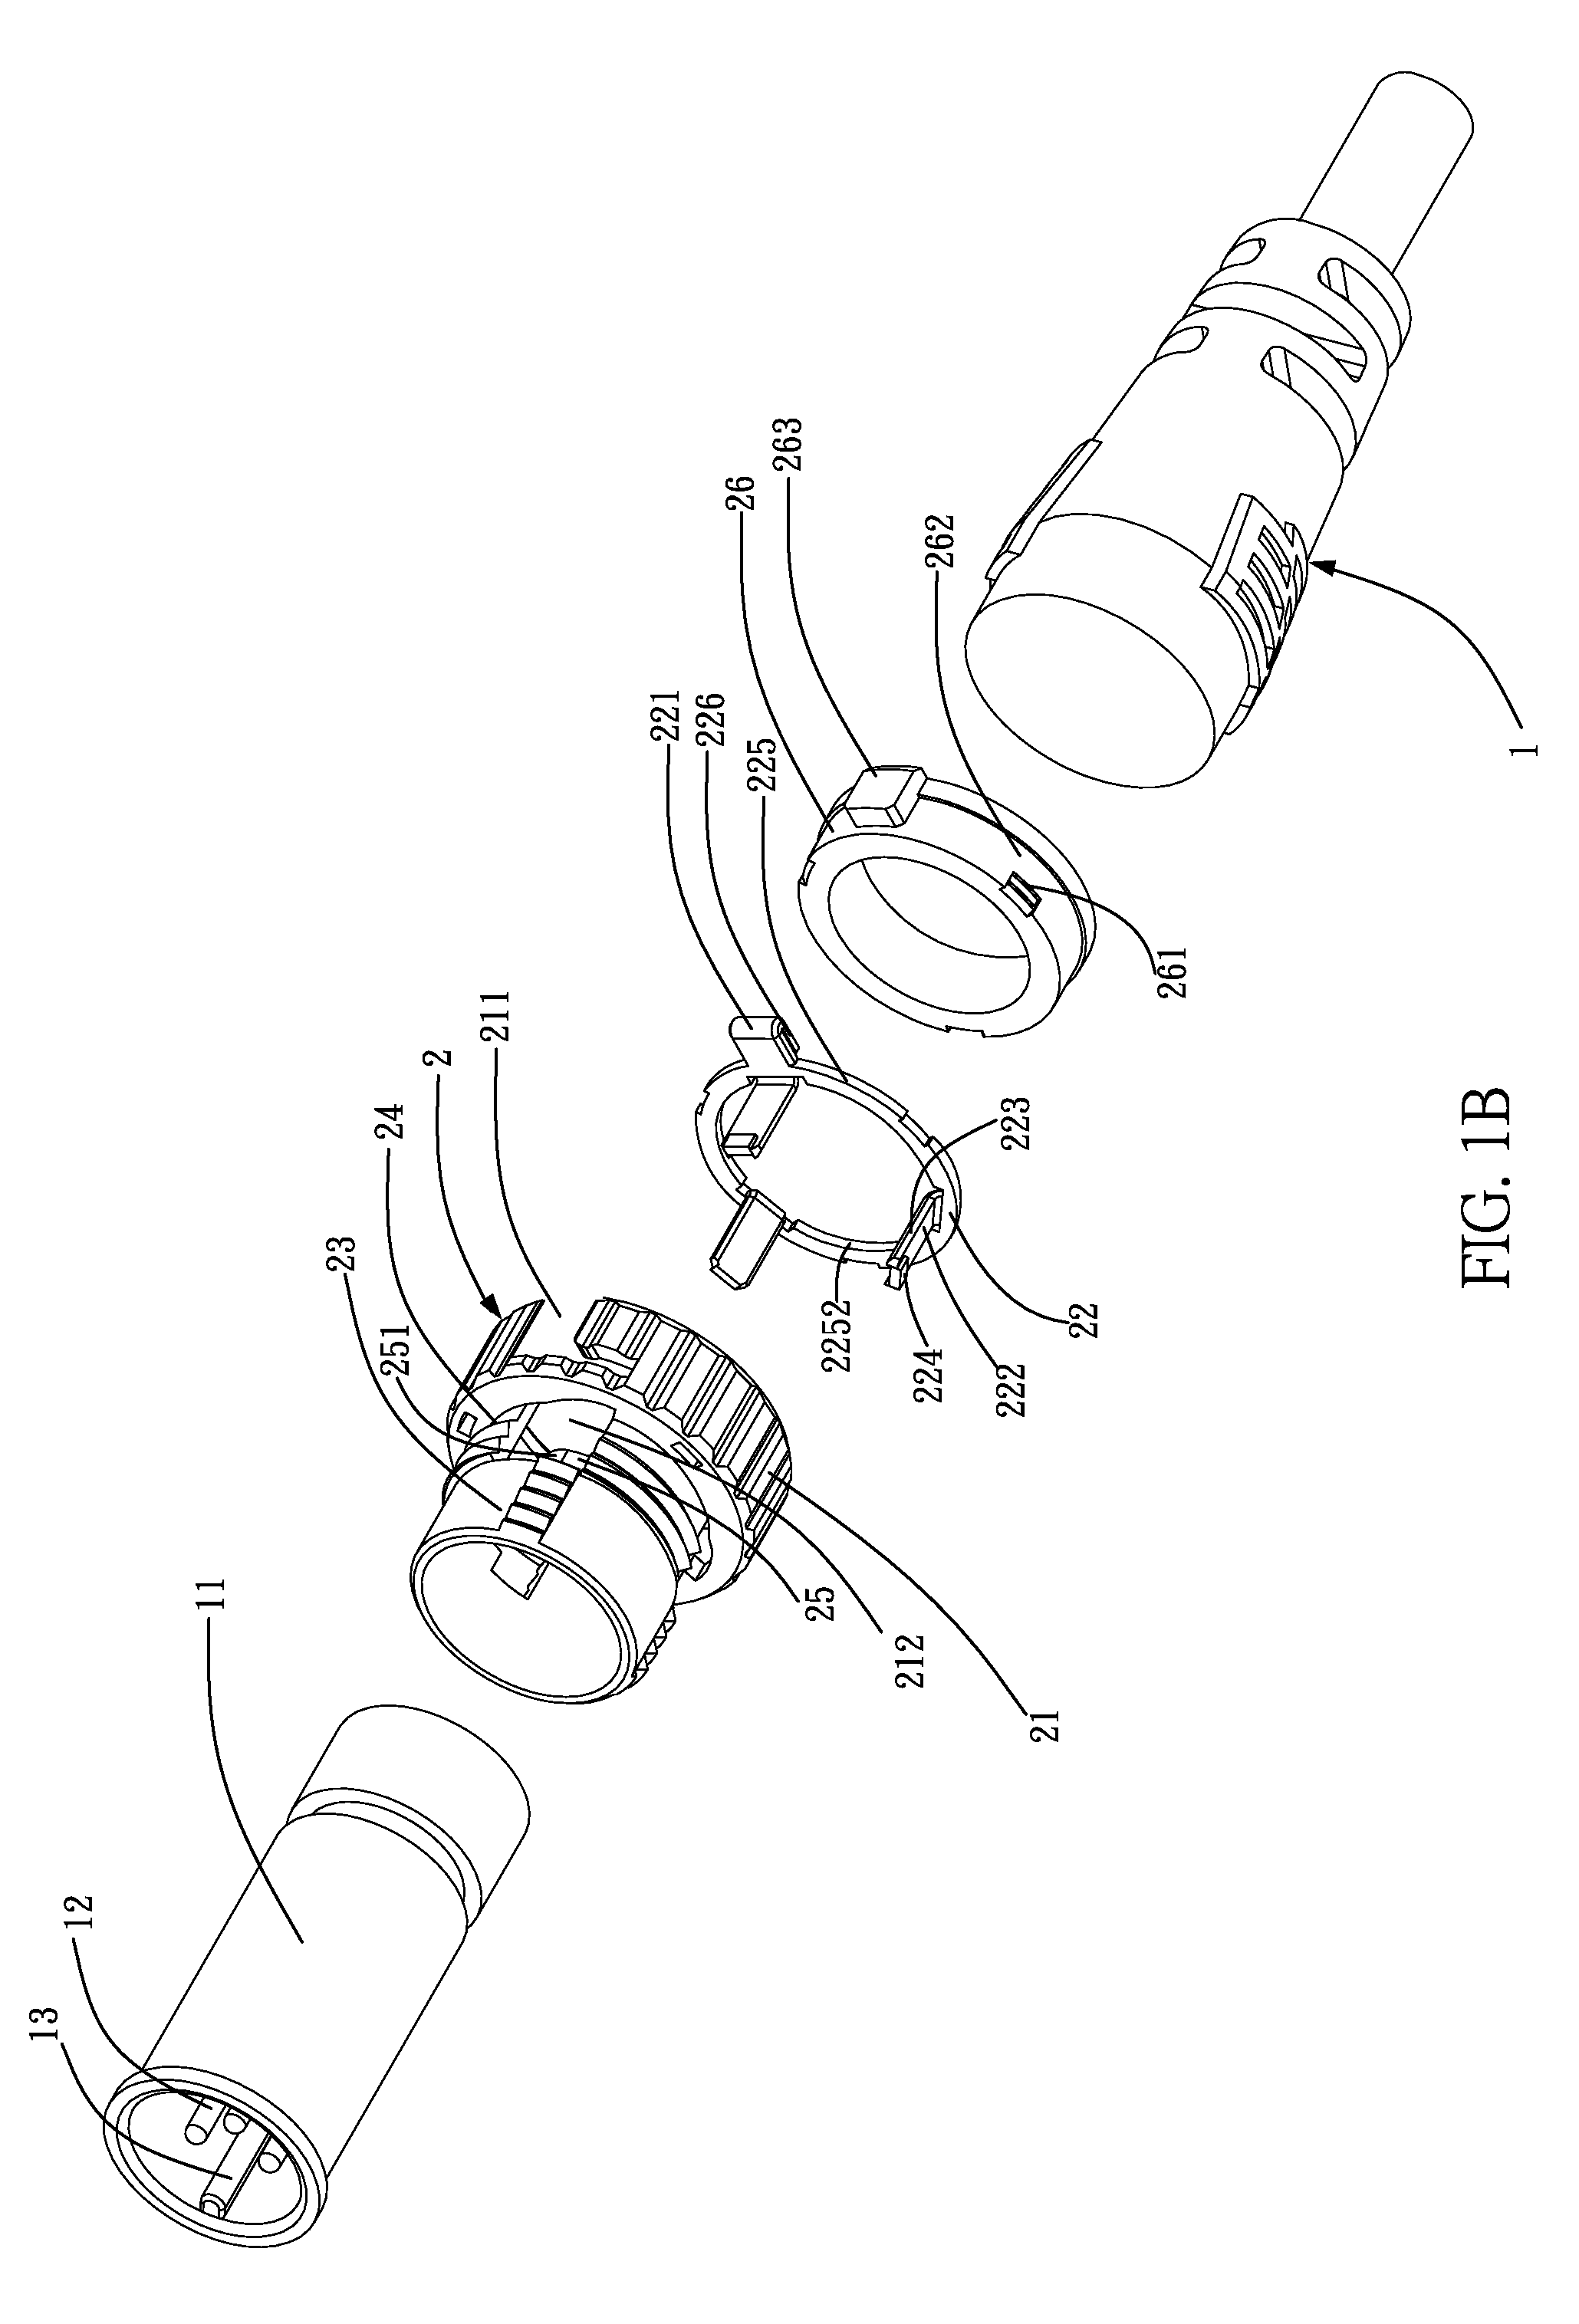 Cable connector with switching structure